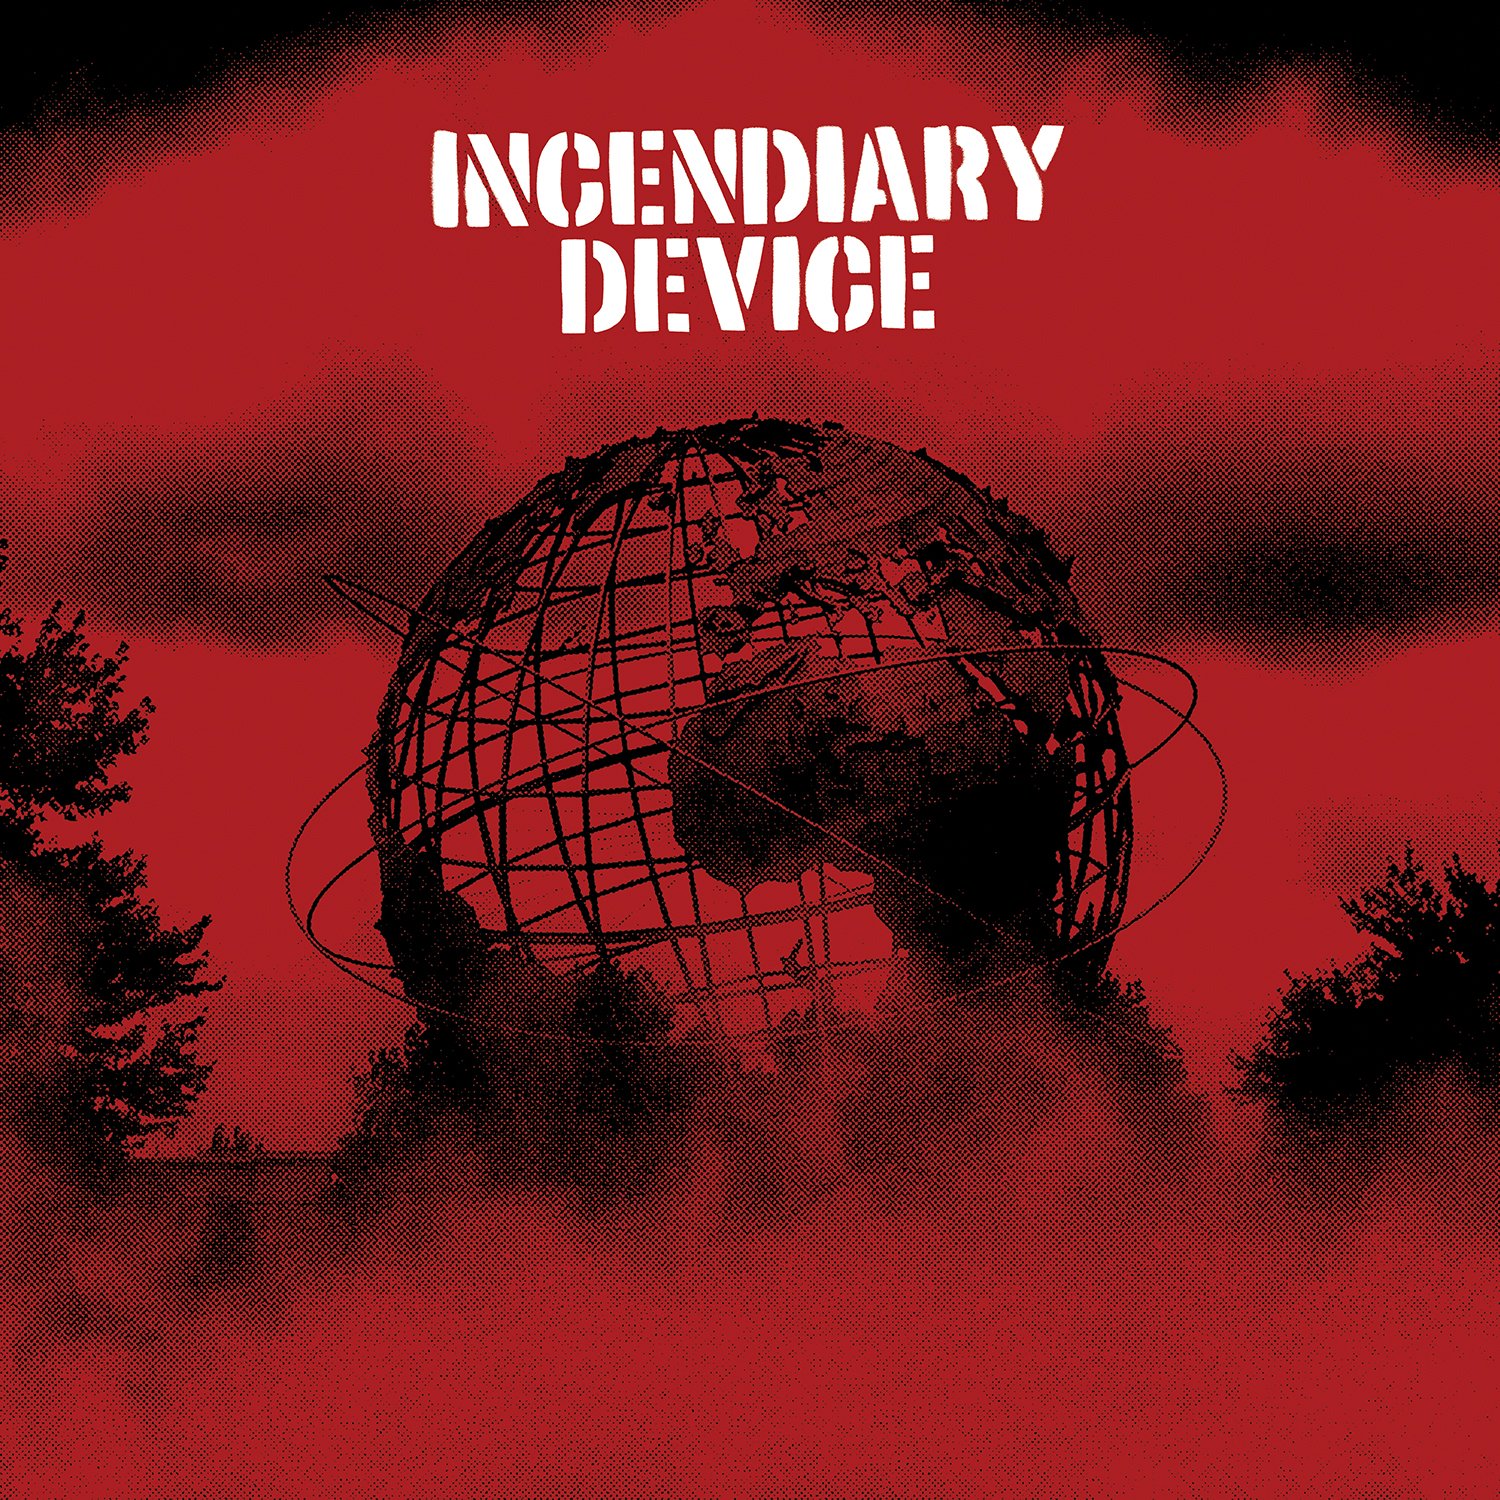 INCENDIARY DEVICE "Incendiary Device"